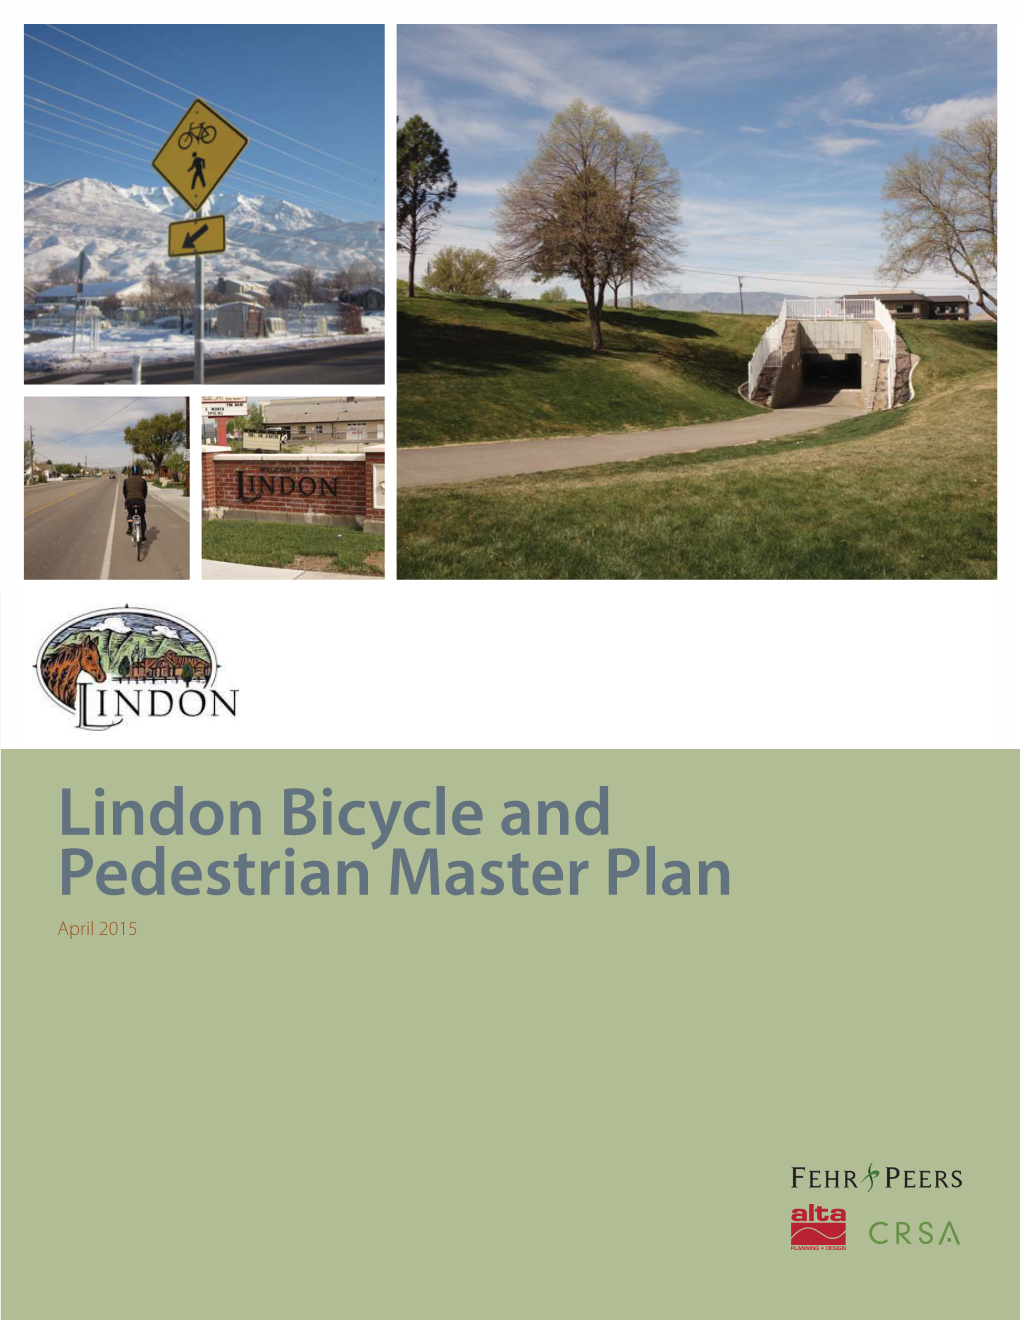 Lindon Bicycle and Pedestrian Master Plan